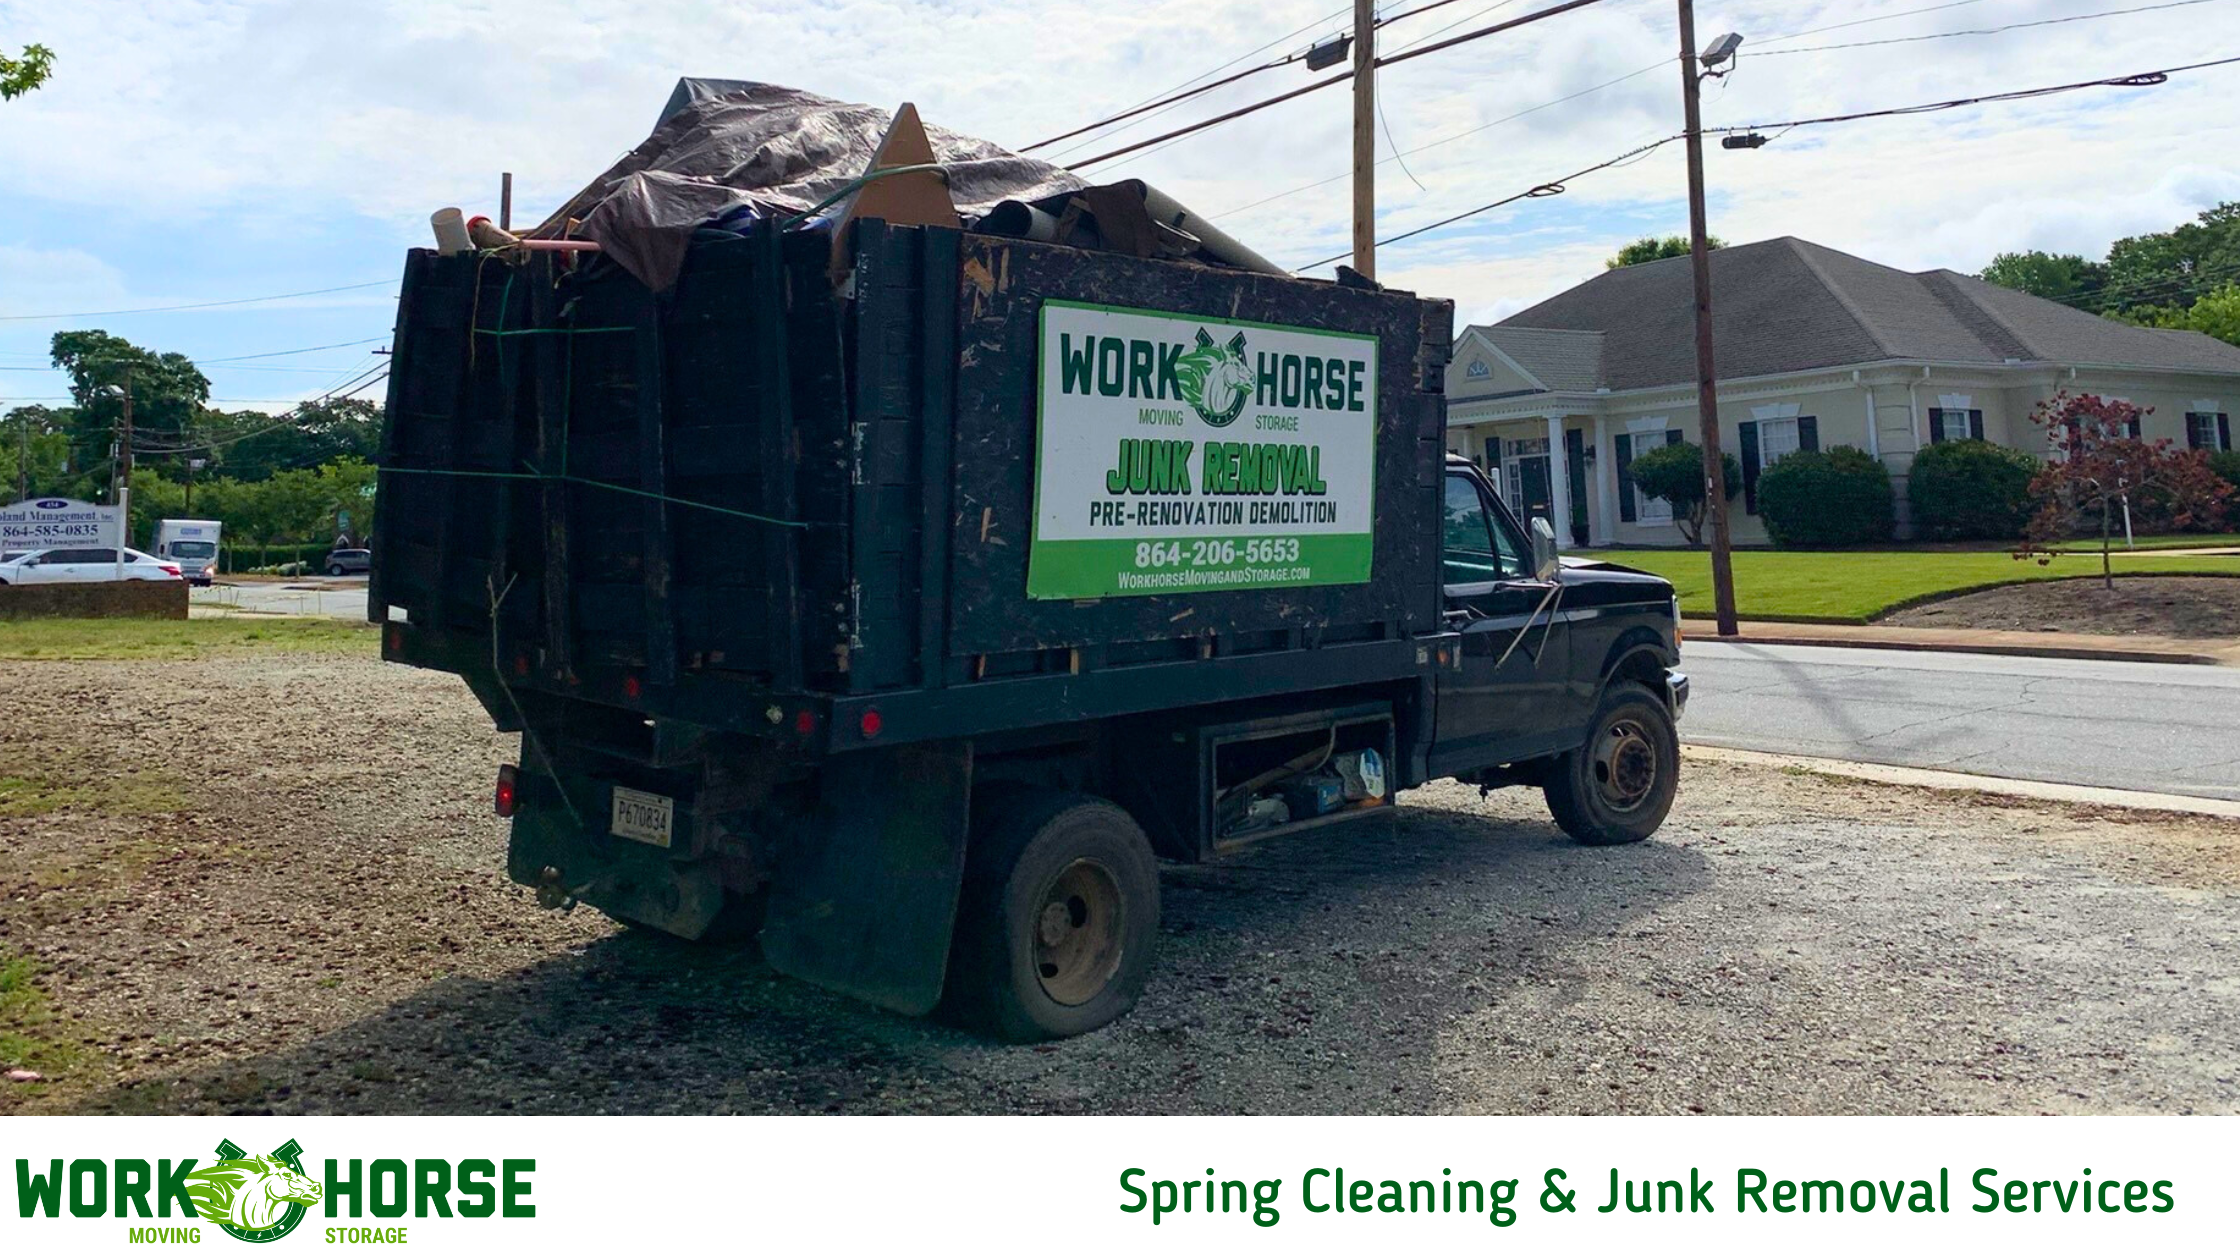 Spring Cleaning and Junk Removal